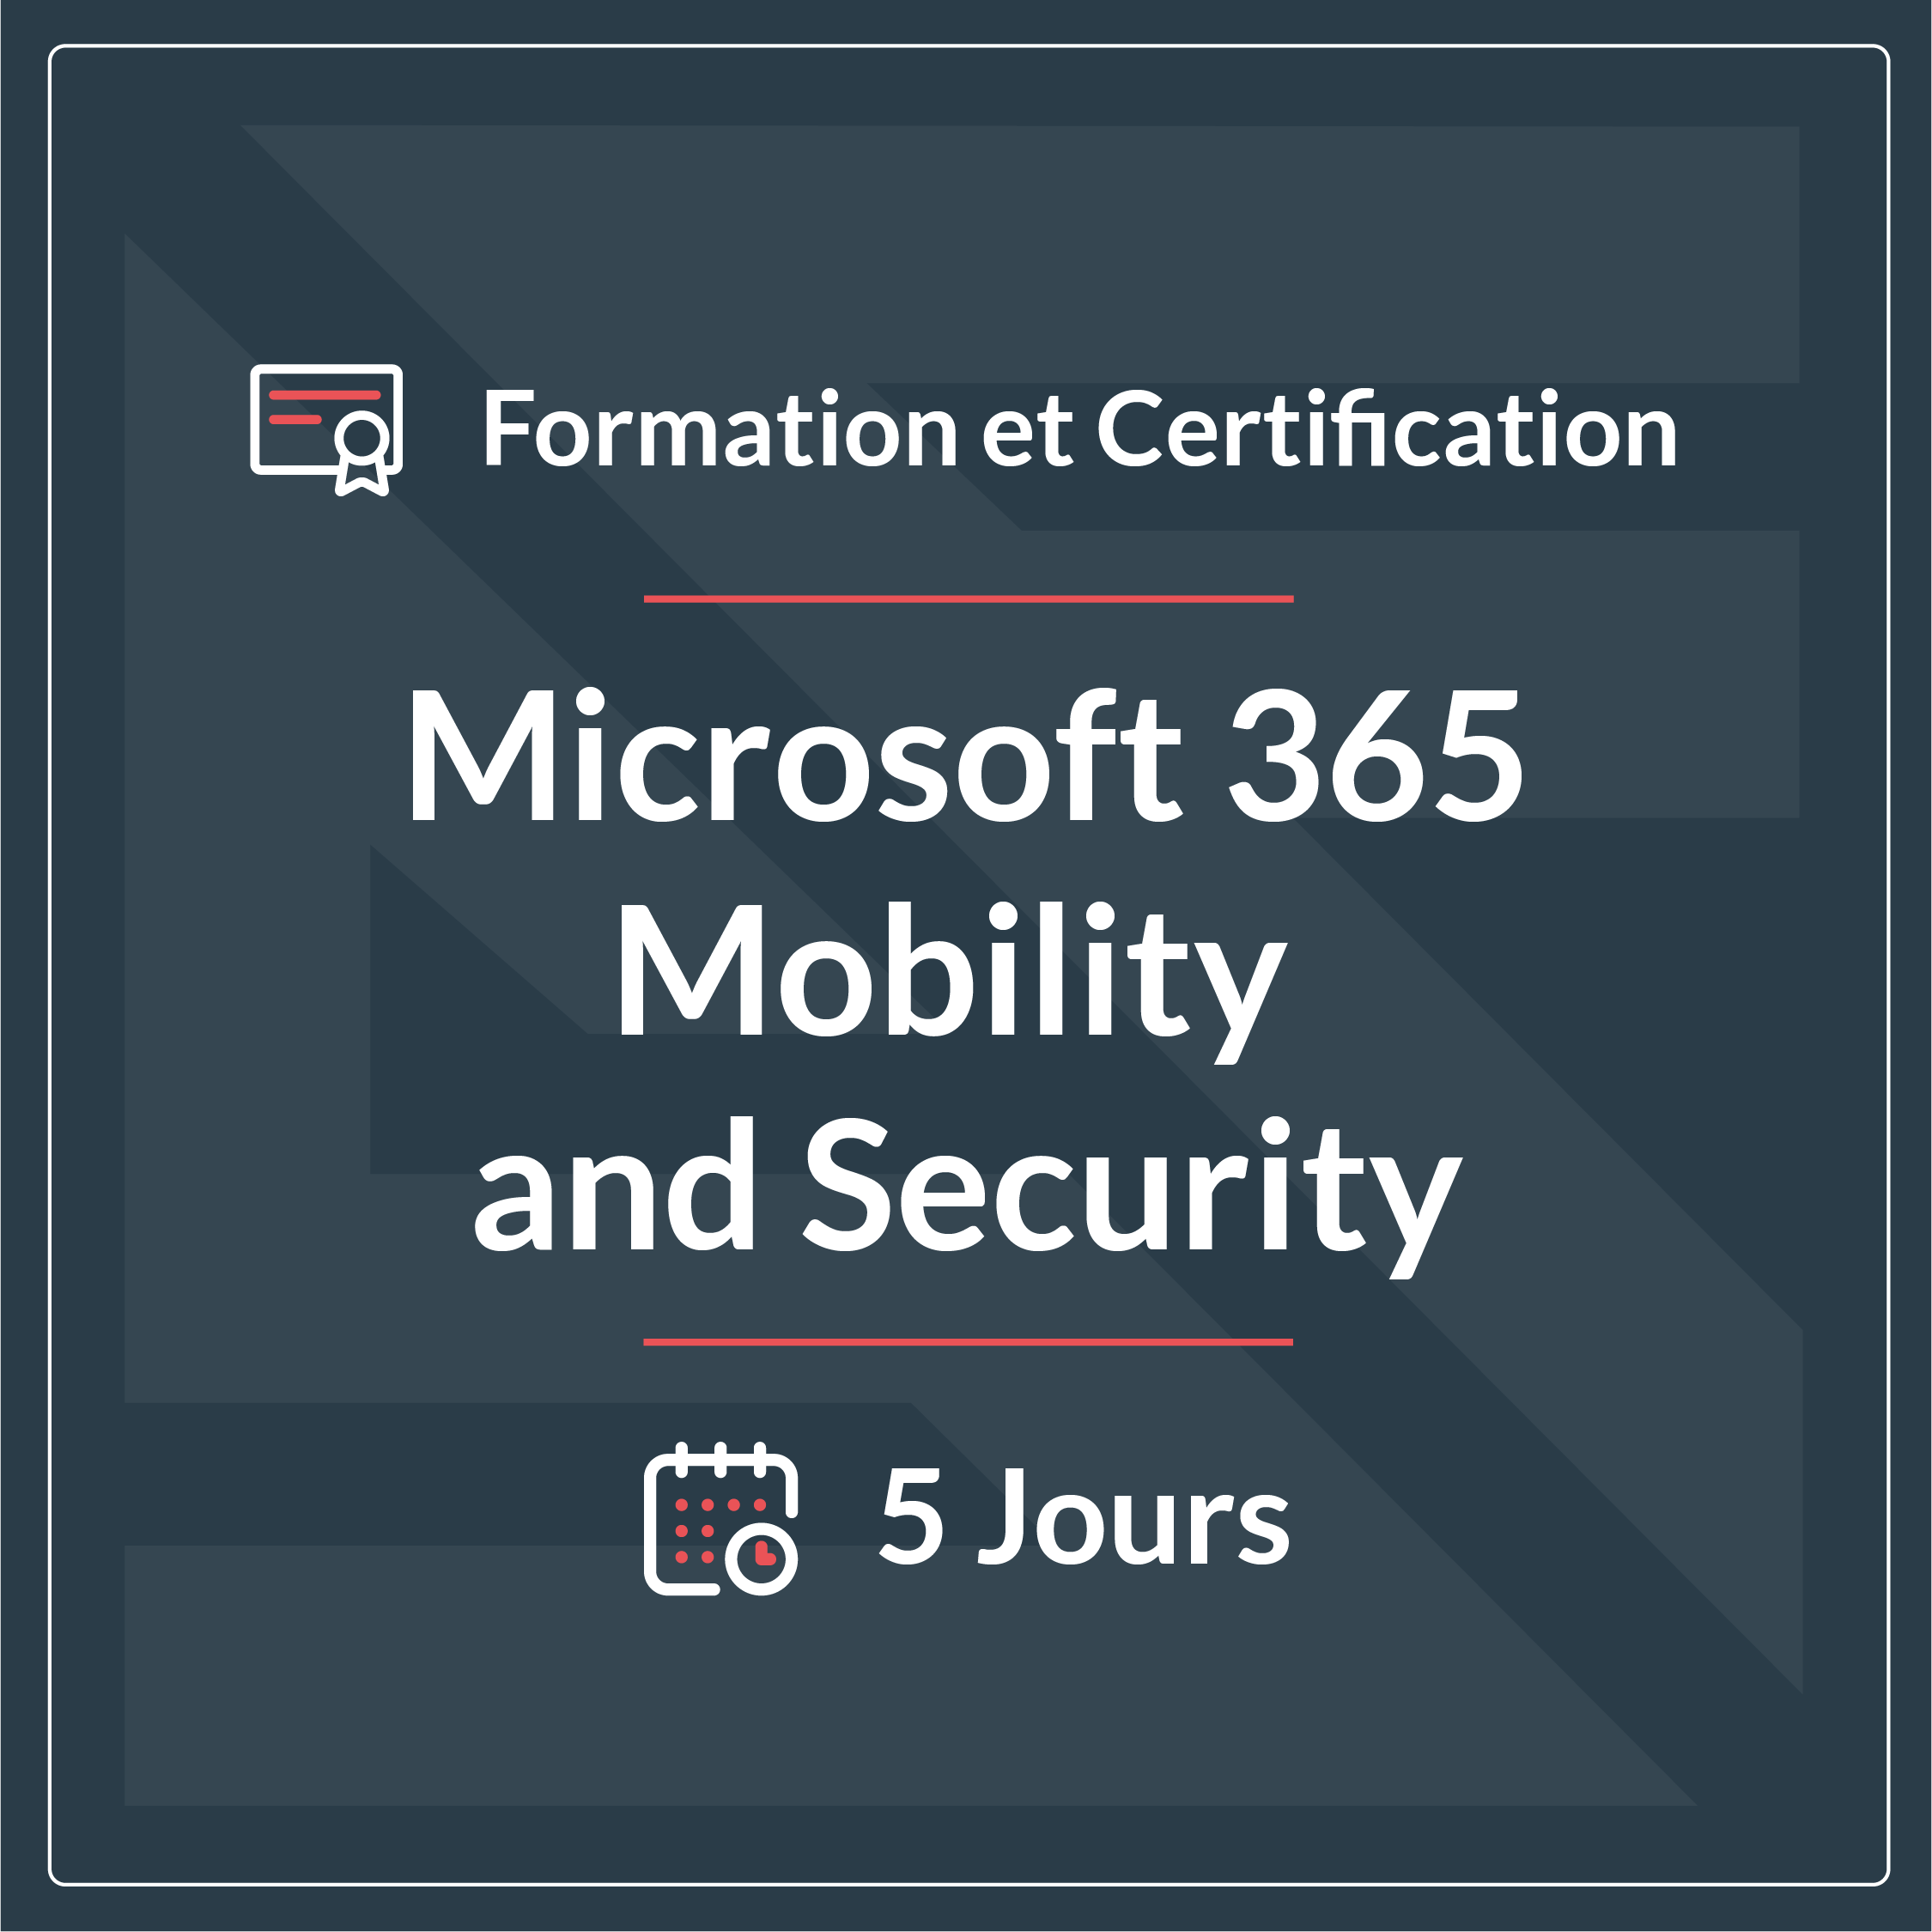 MICROSOFT 365 MOBILITY AND SECURITY